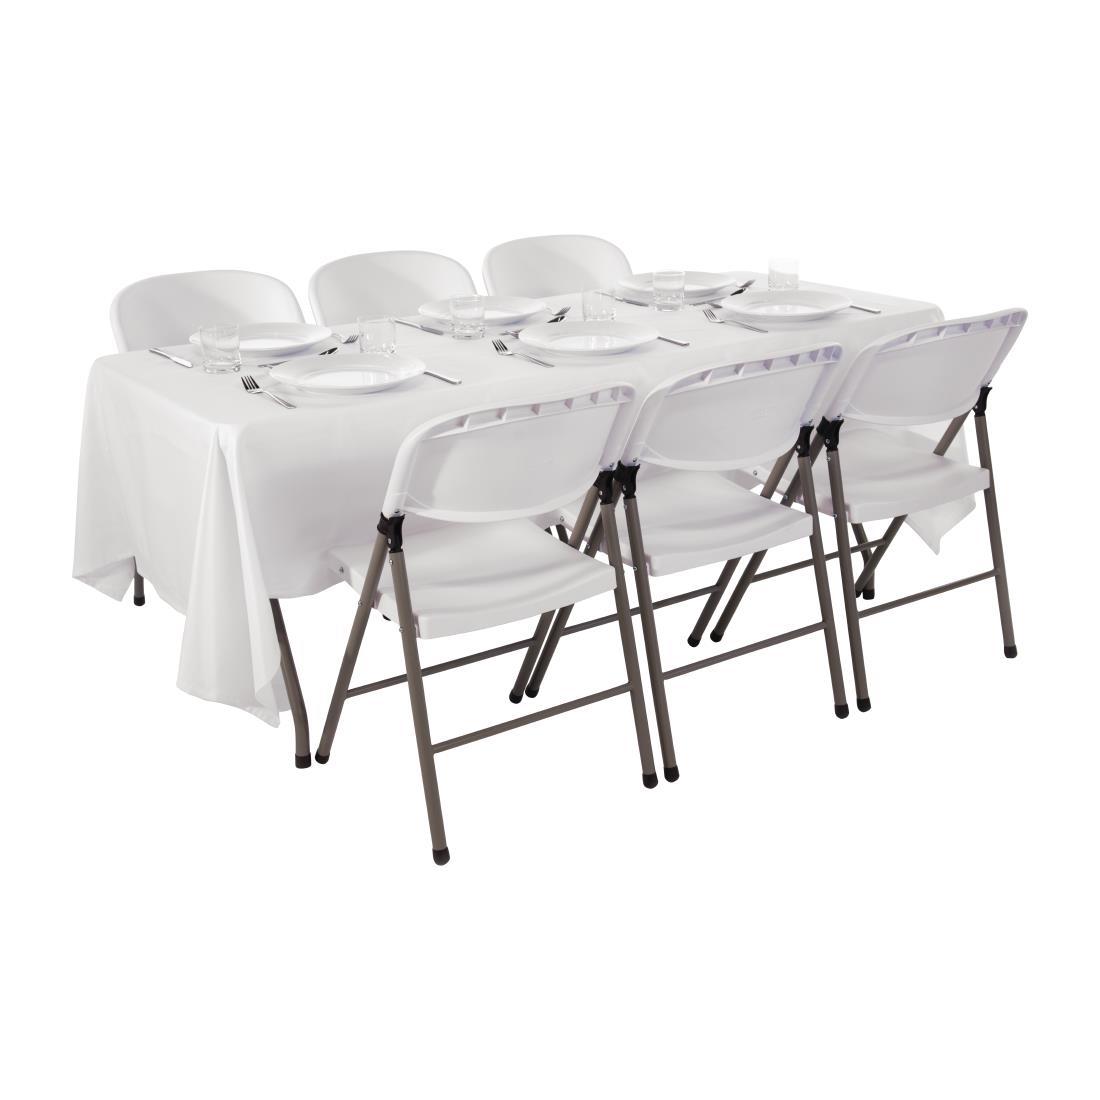 Special Offer Bolero PE Centre Folding Table 6ft with Six Folding Chairs - SA426  - 3